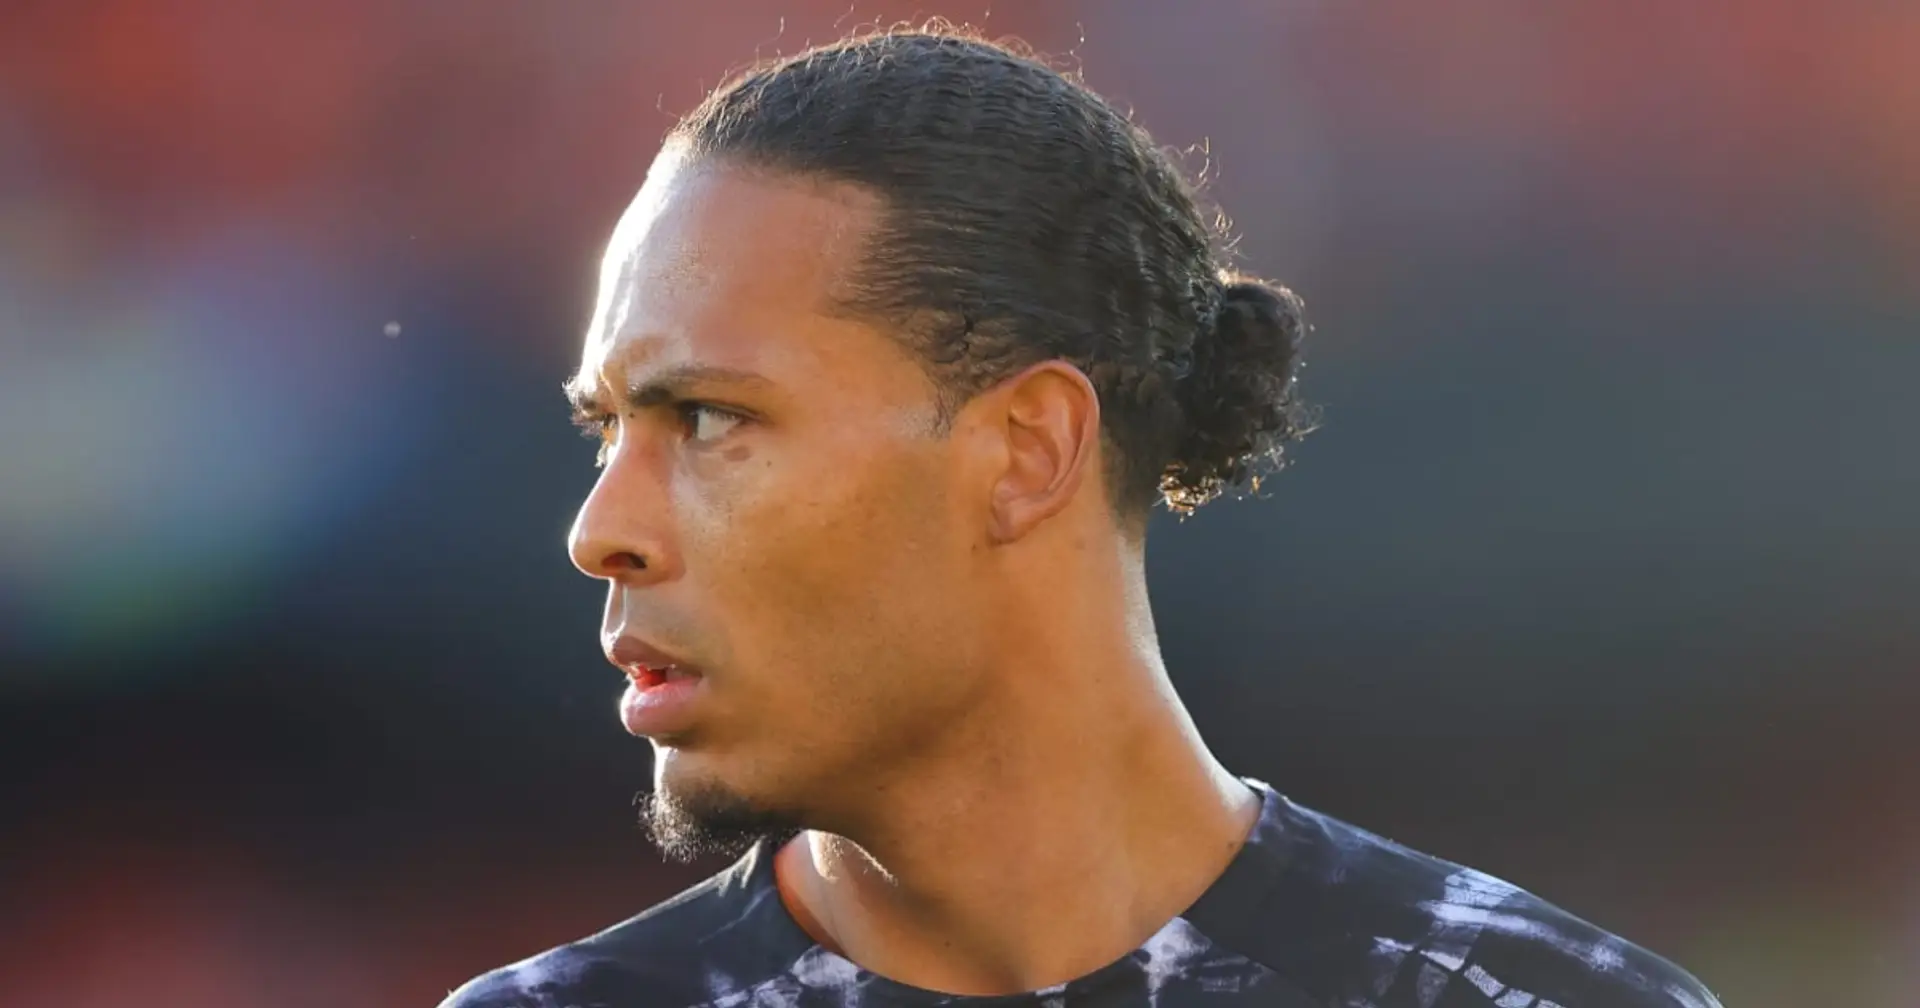 Van Dijk hit with FA charges & 3 other big stories at Liverpool you could've missed